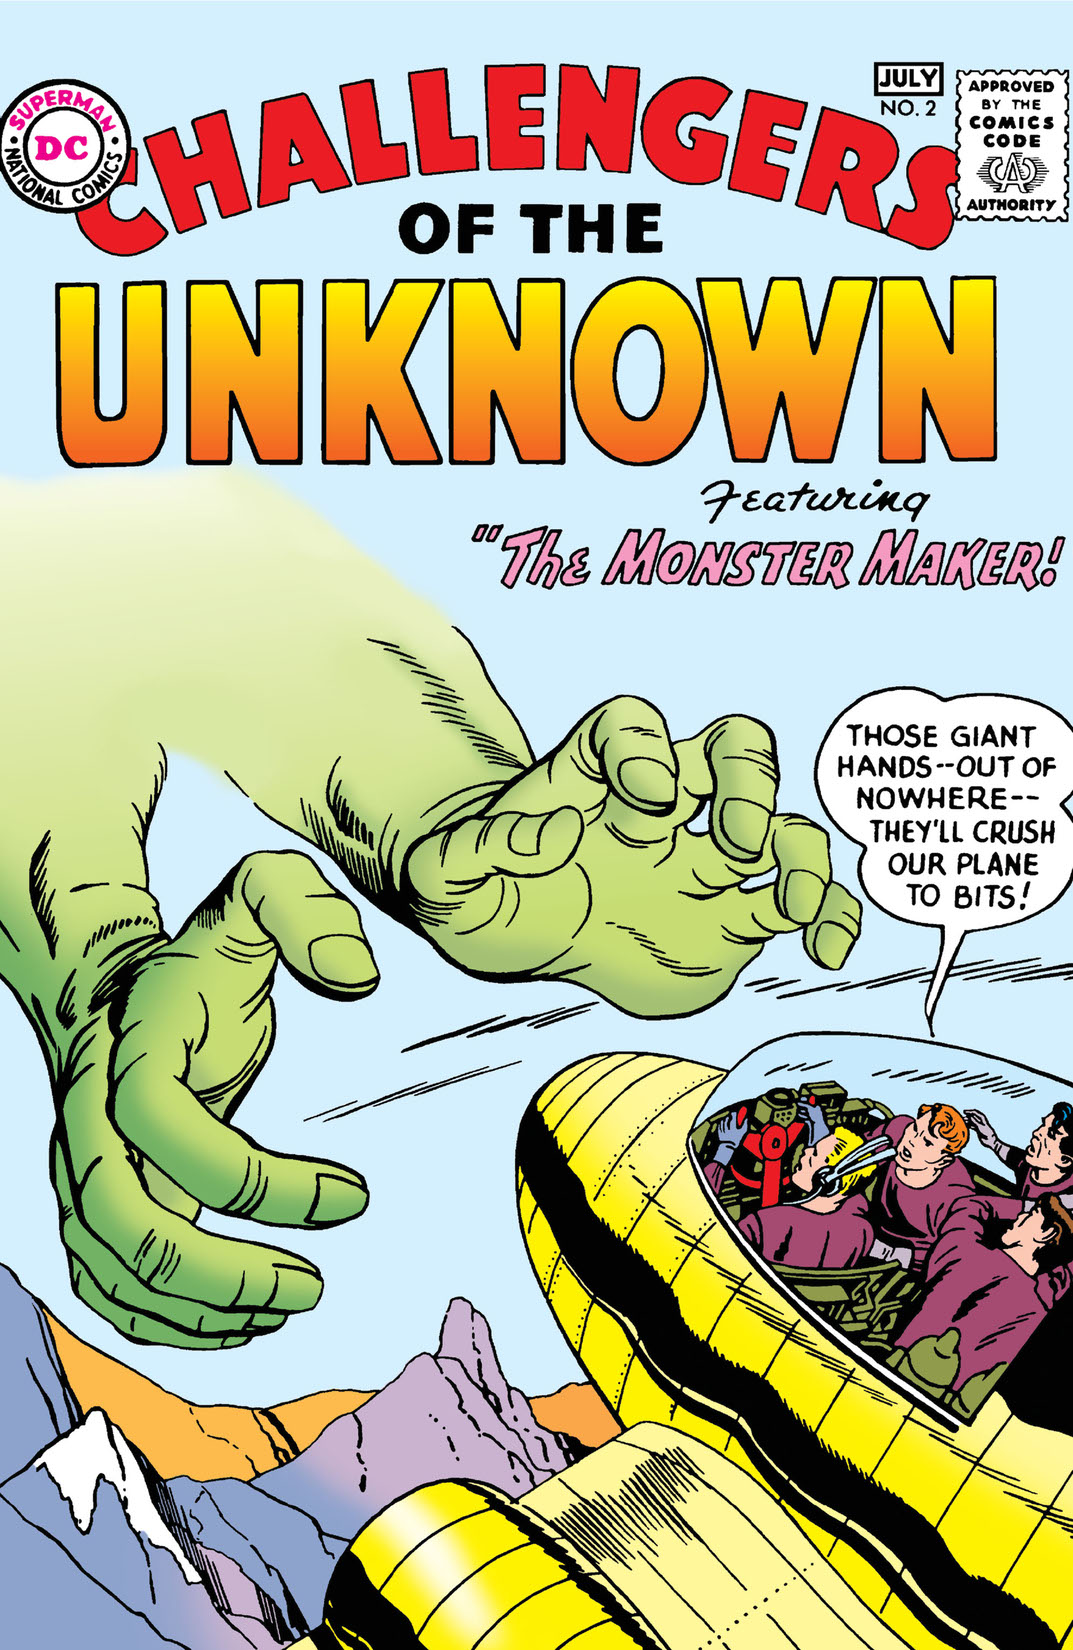 Challengers of the Unknown (1958-) #2 preview images